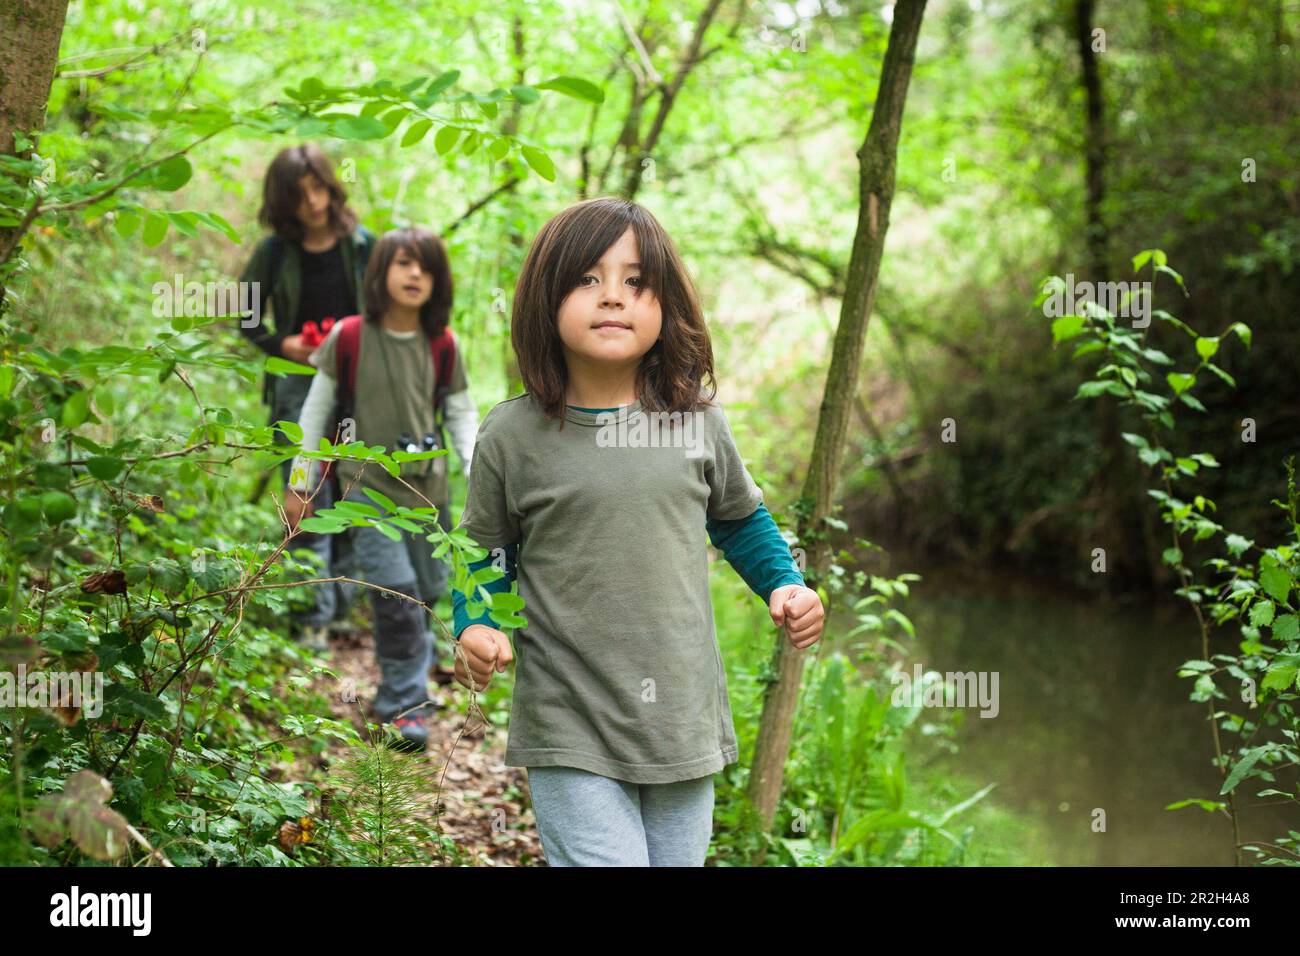 Three siblings walking and exploring the forest alongside a stream. In the foreground, the youngest sibling is leading the way. Stock Photo